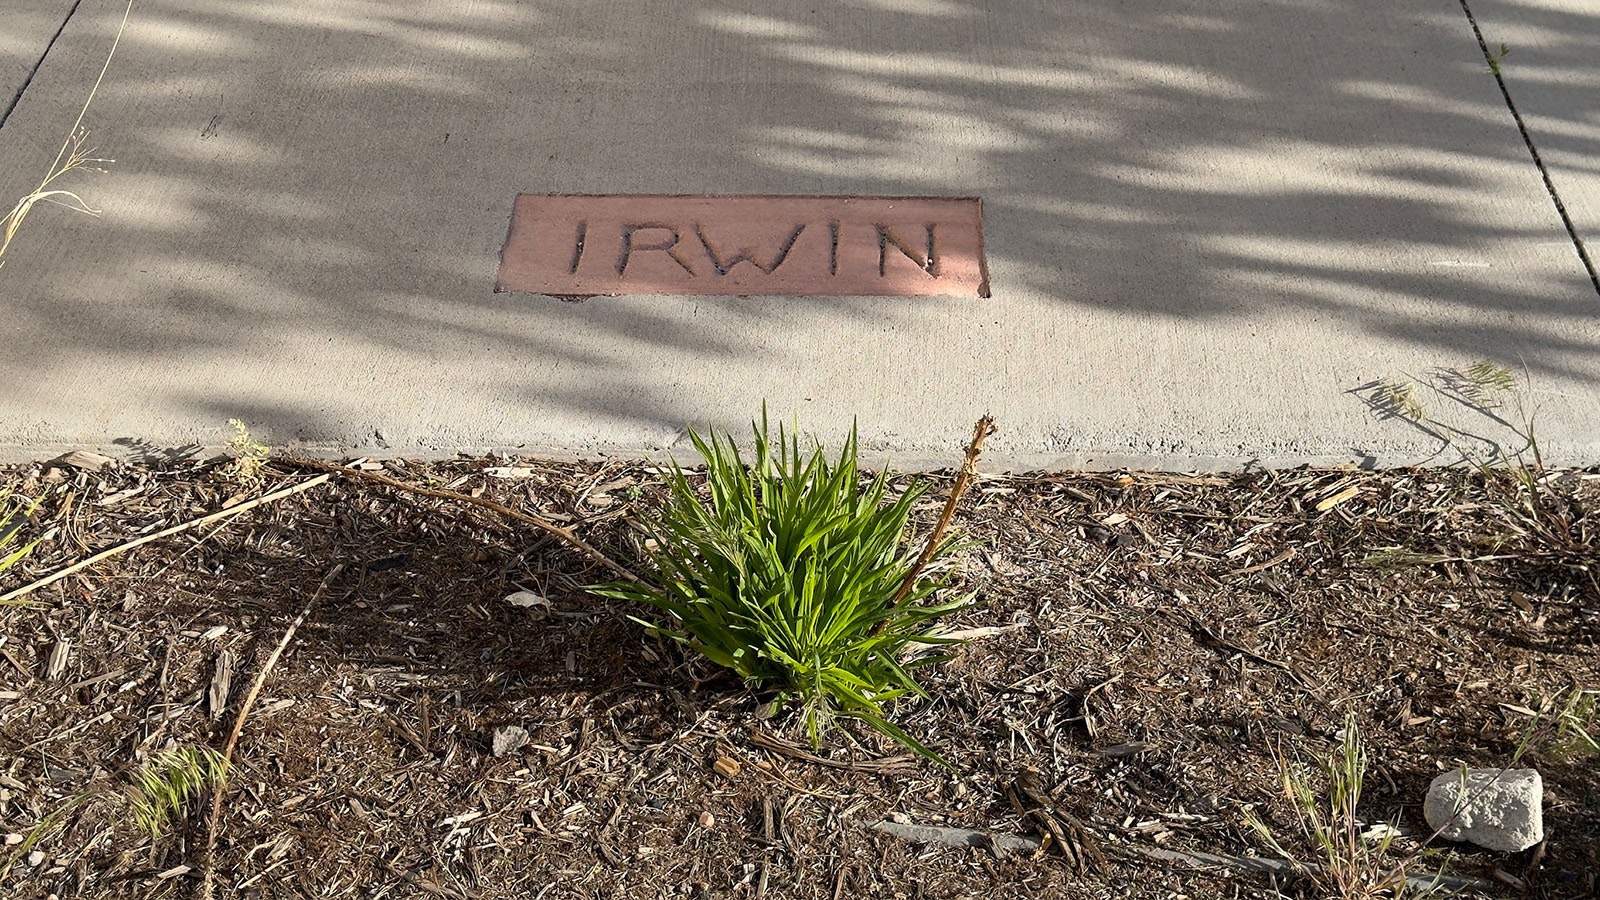 An inlaid brick tells everyone this is the famous Irwin Barn.